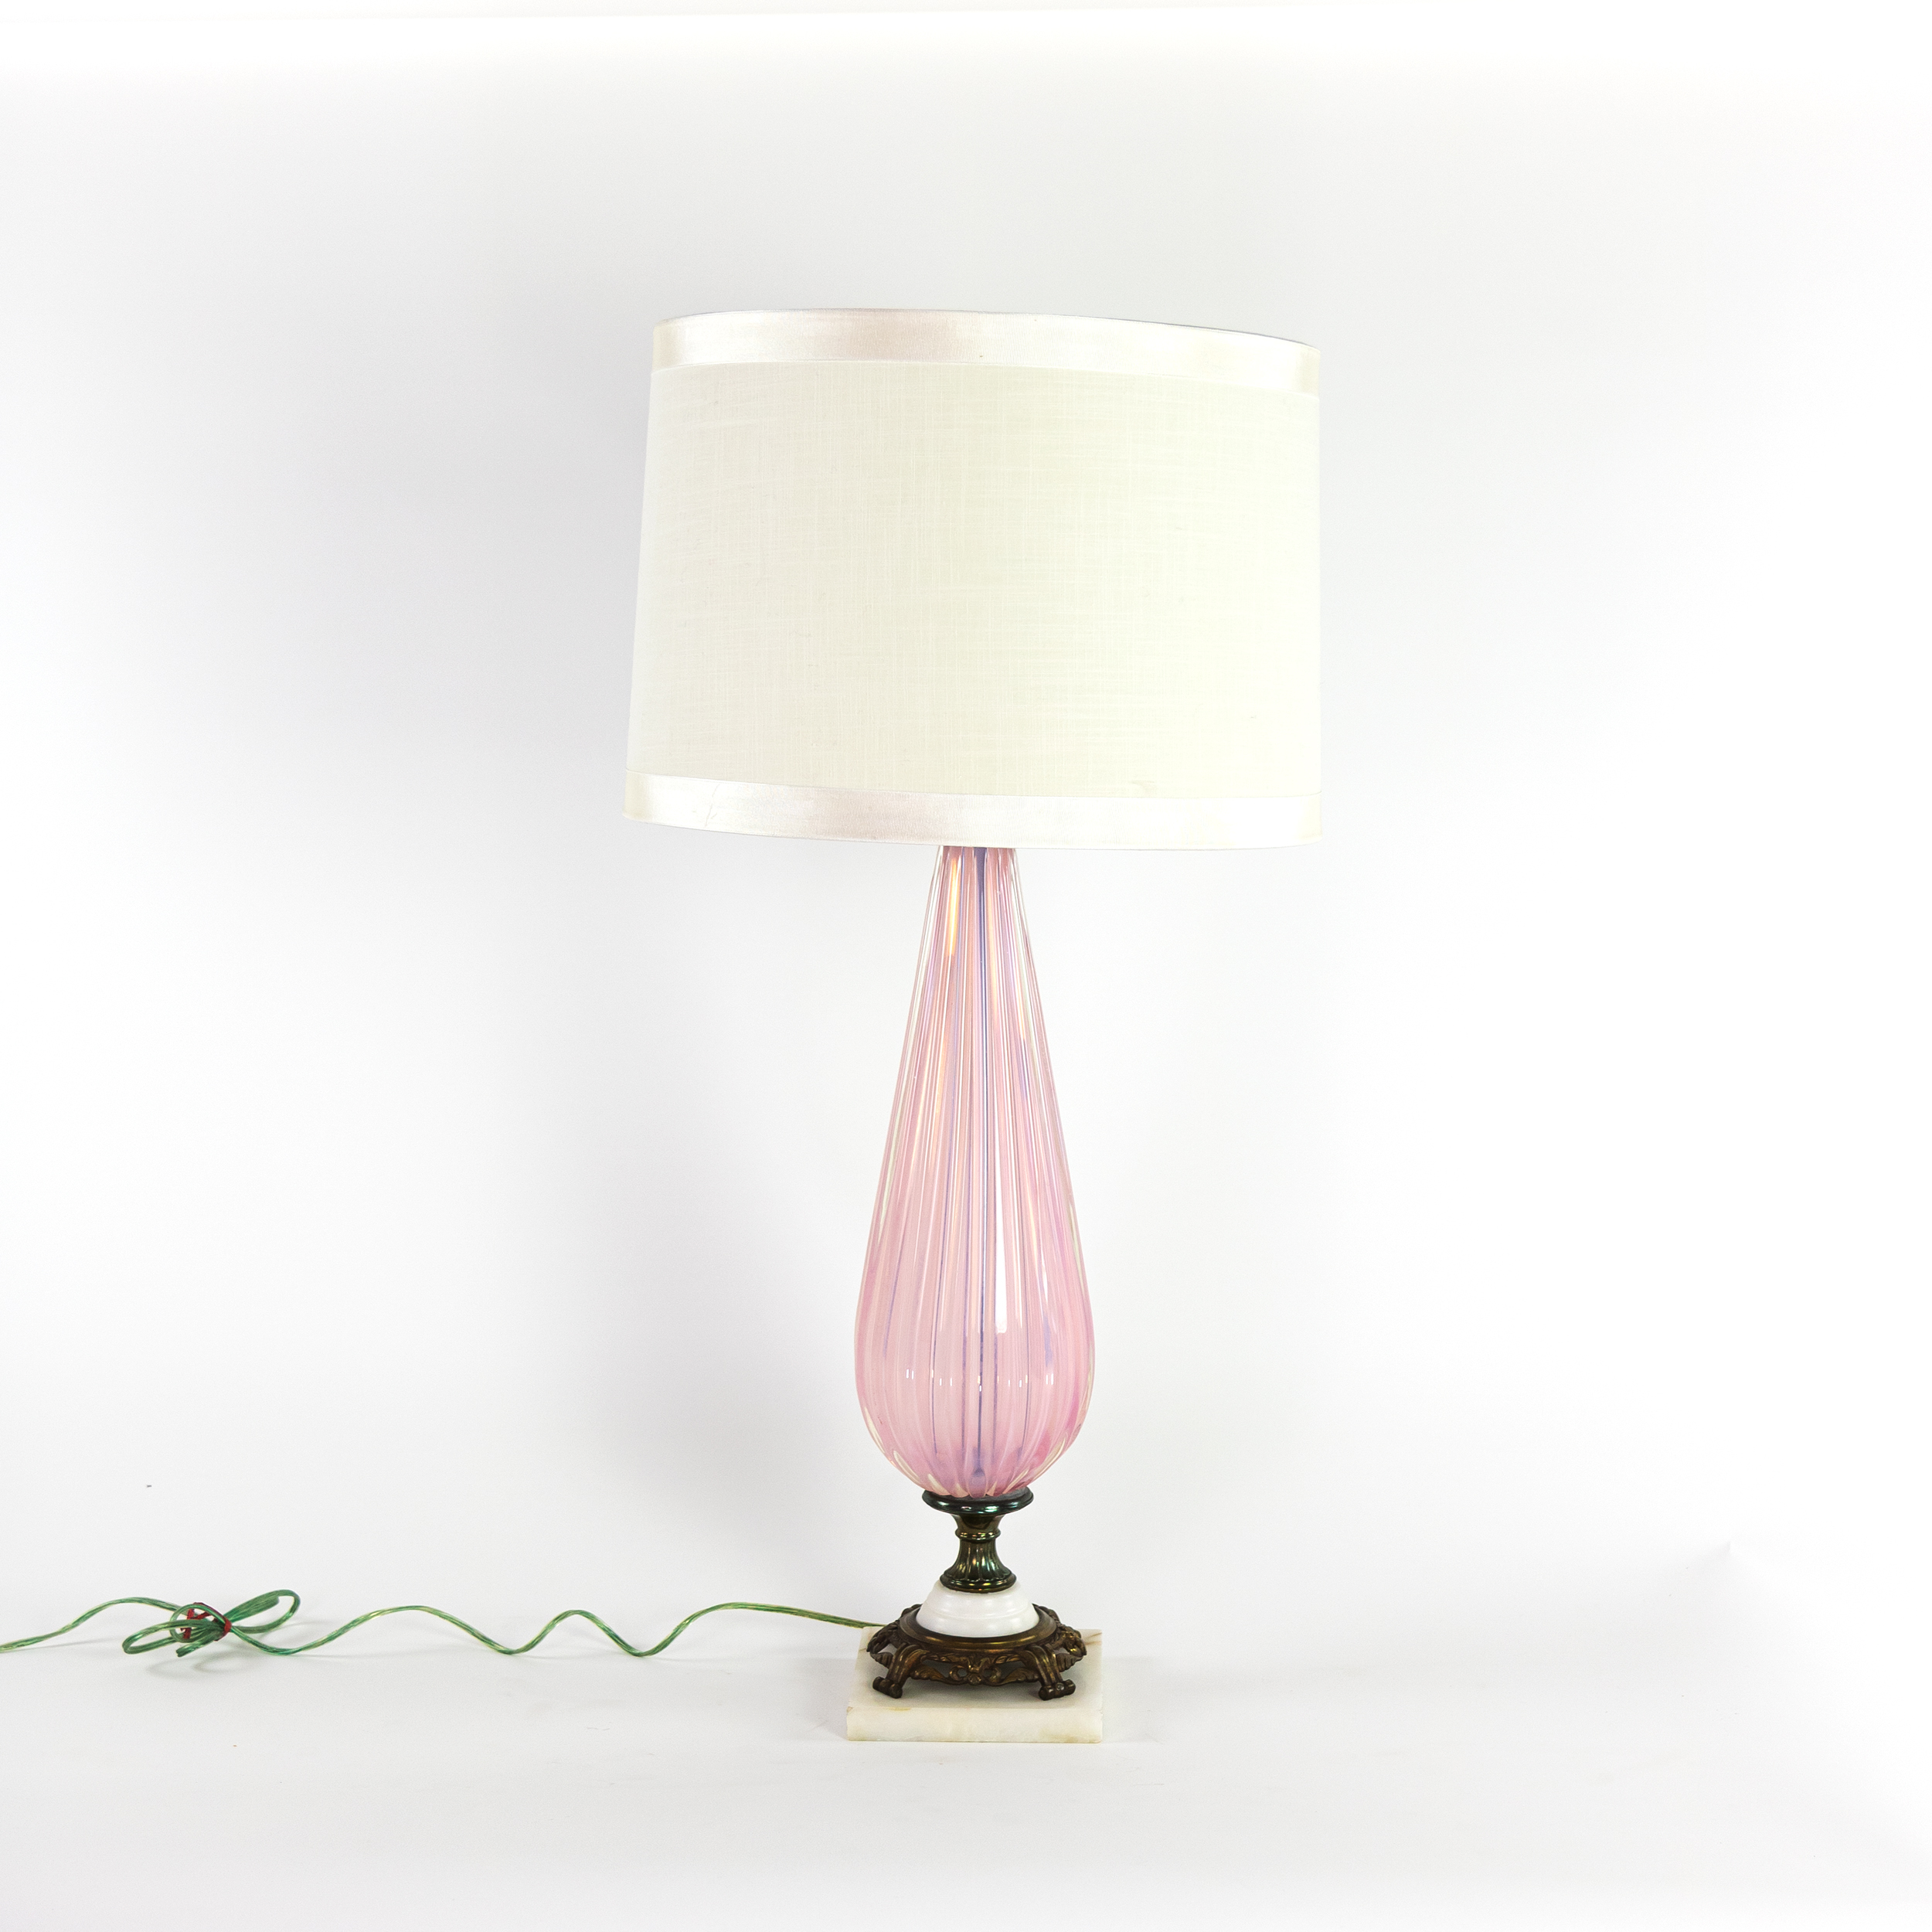 studieafgift Martyr høflighed Pink Murano Glass Table Lamp With Brass Feet On White Marble Base, Italy  Circa 1960. - Garden Court Antiques